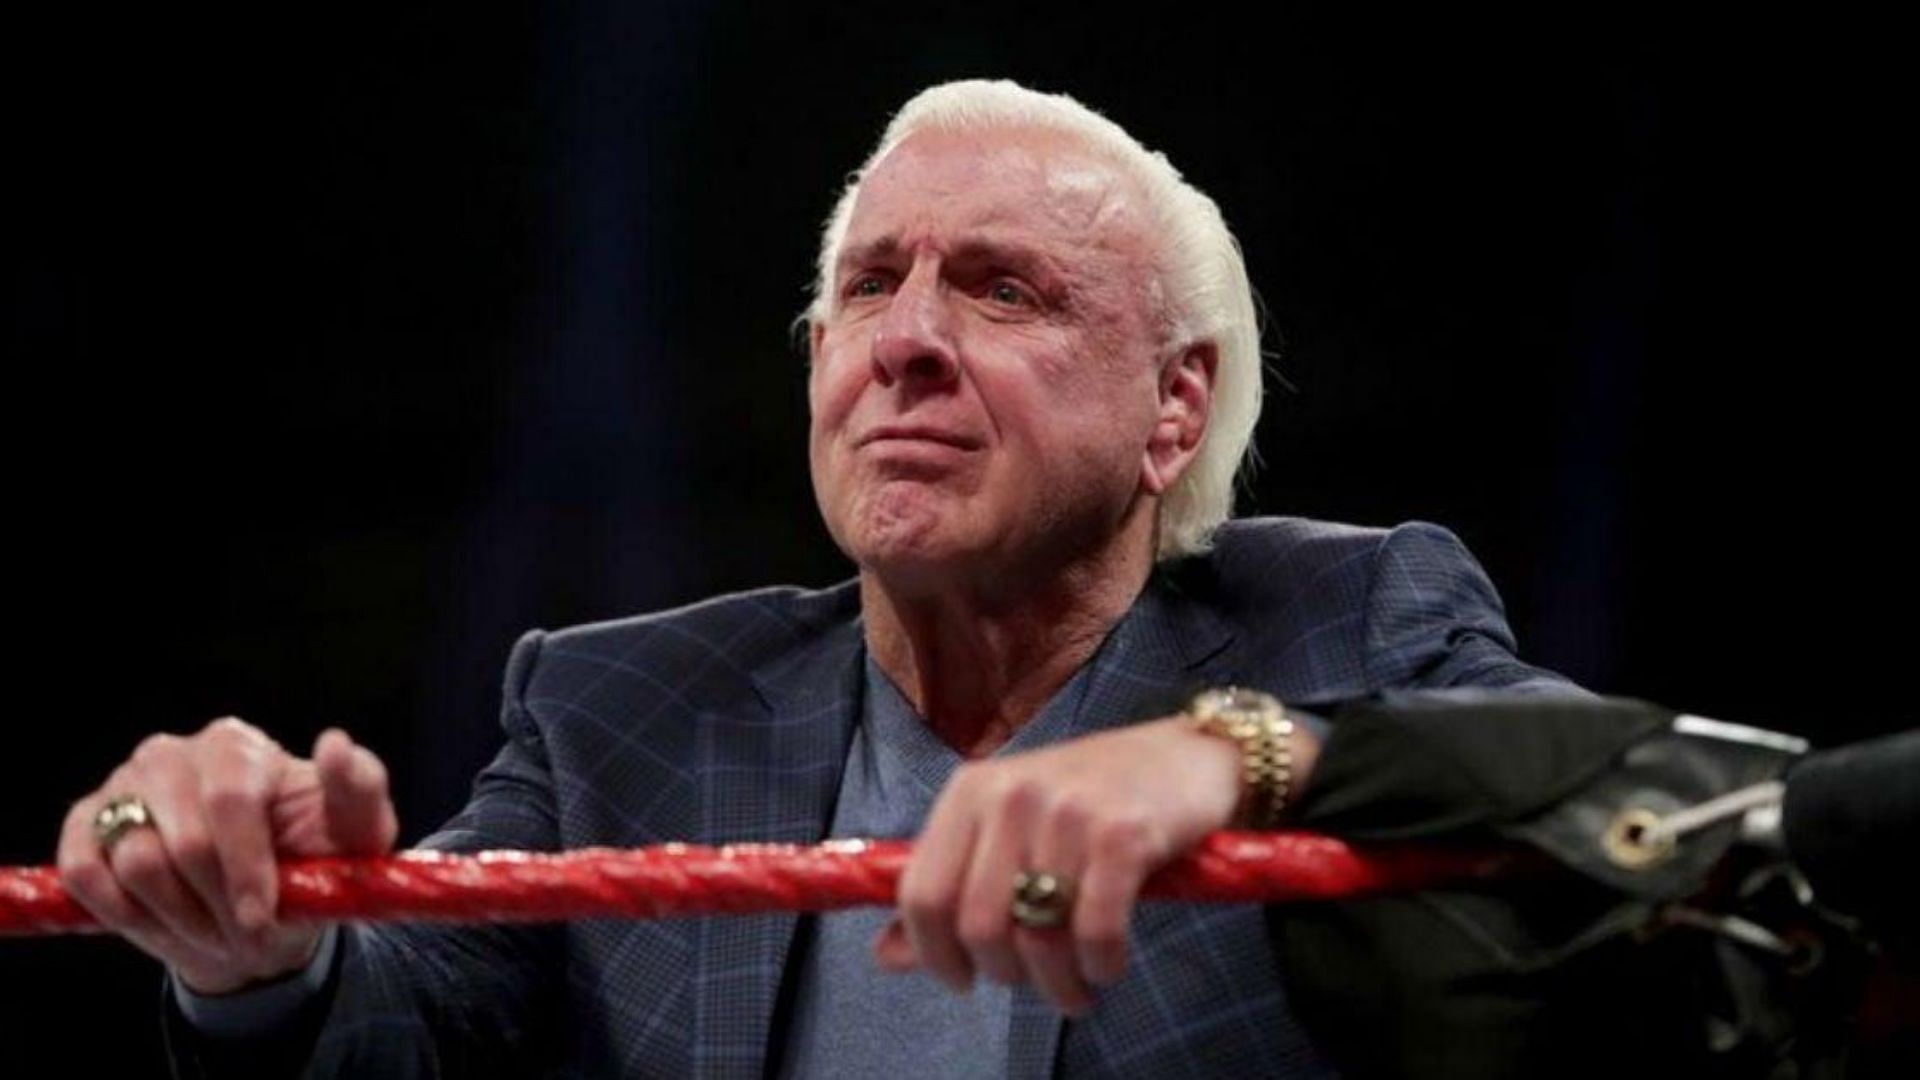 Ric Flair at a WWE Monday Night RAW event